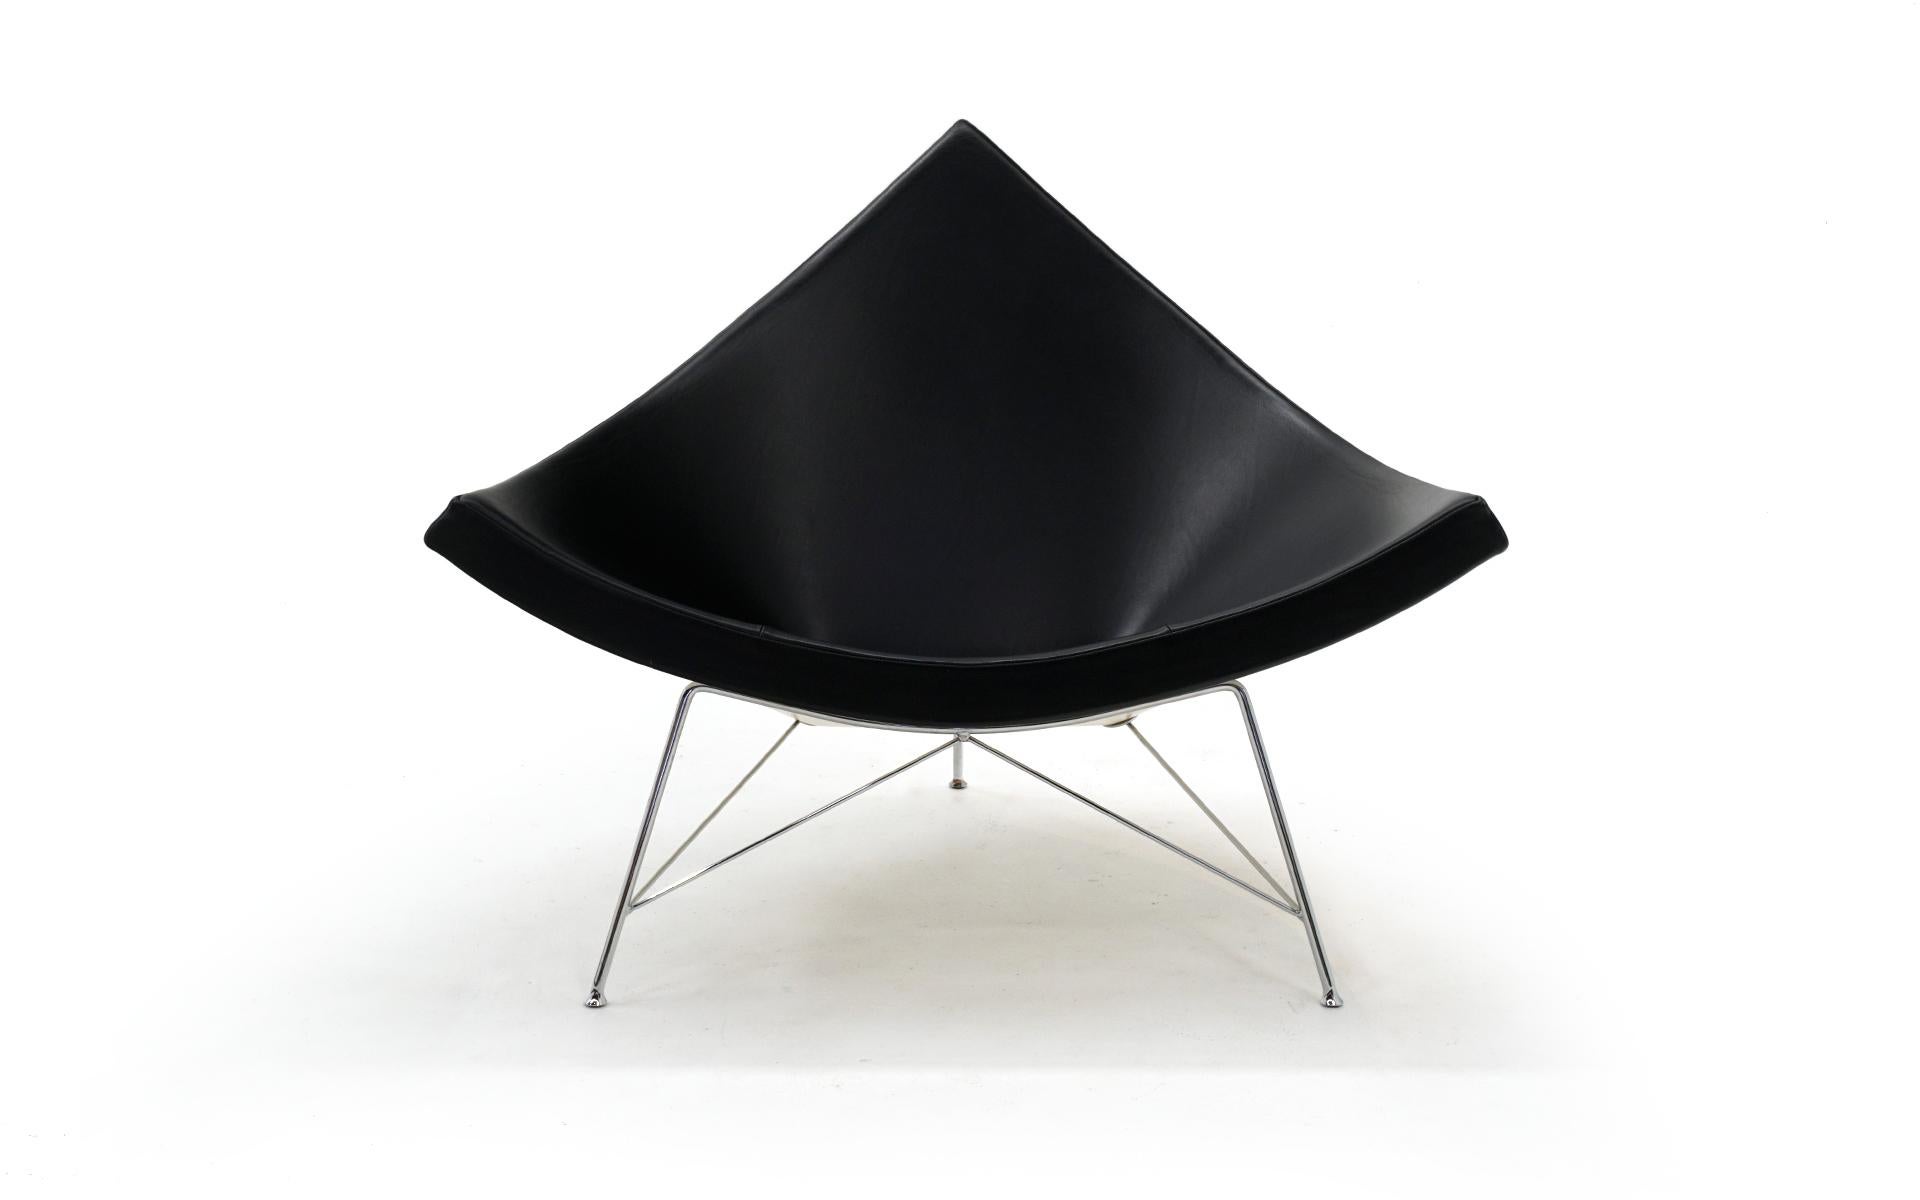 Coconut lounge chair designed by George Nelson for Herman Miller, manufactured by Vitra. Black leather, white shell and chrome legs. Very good original condition.